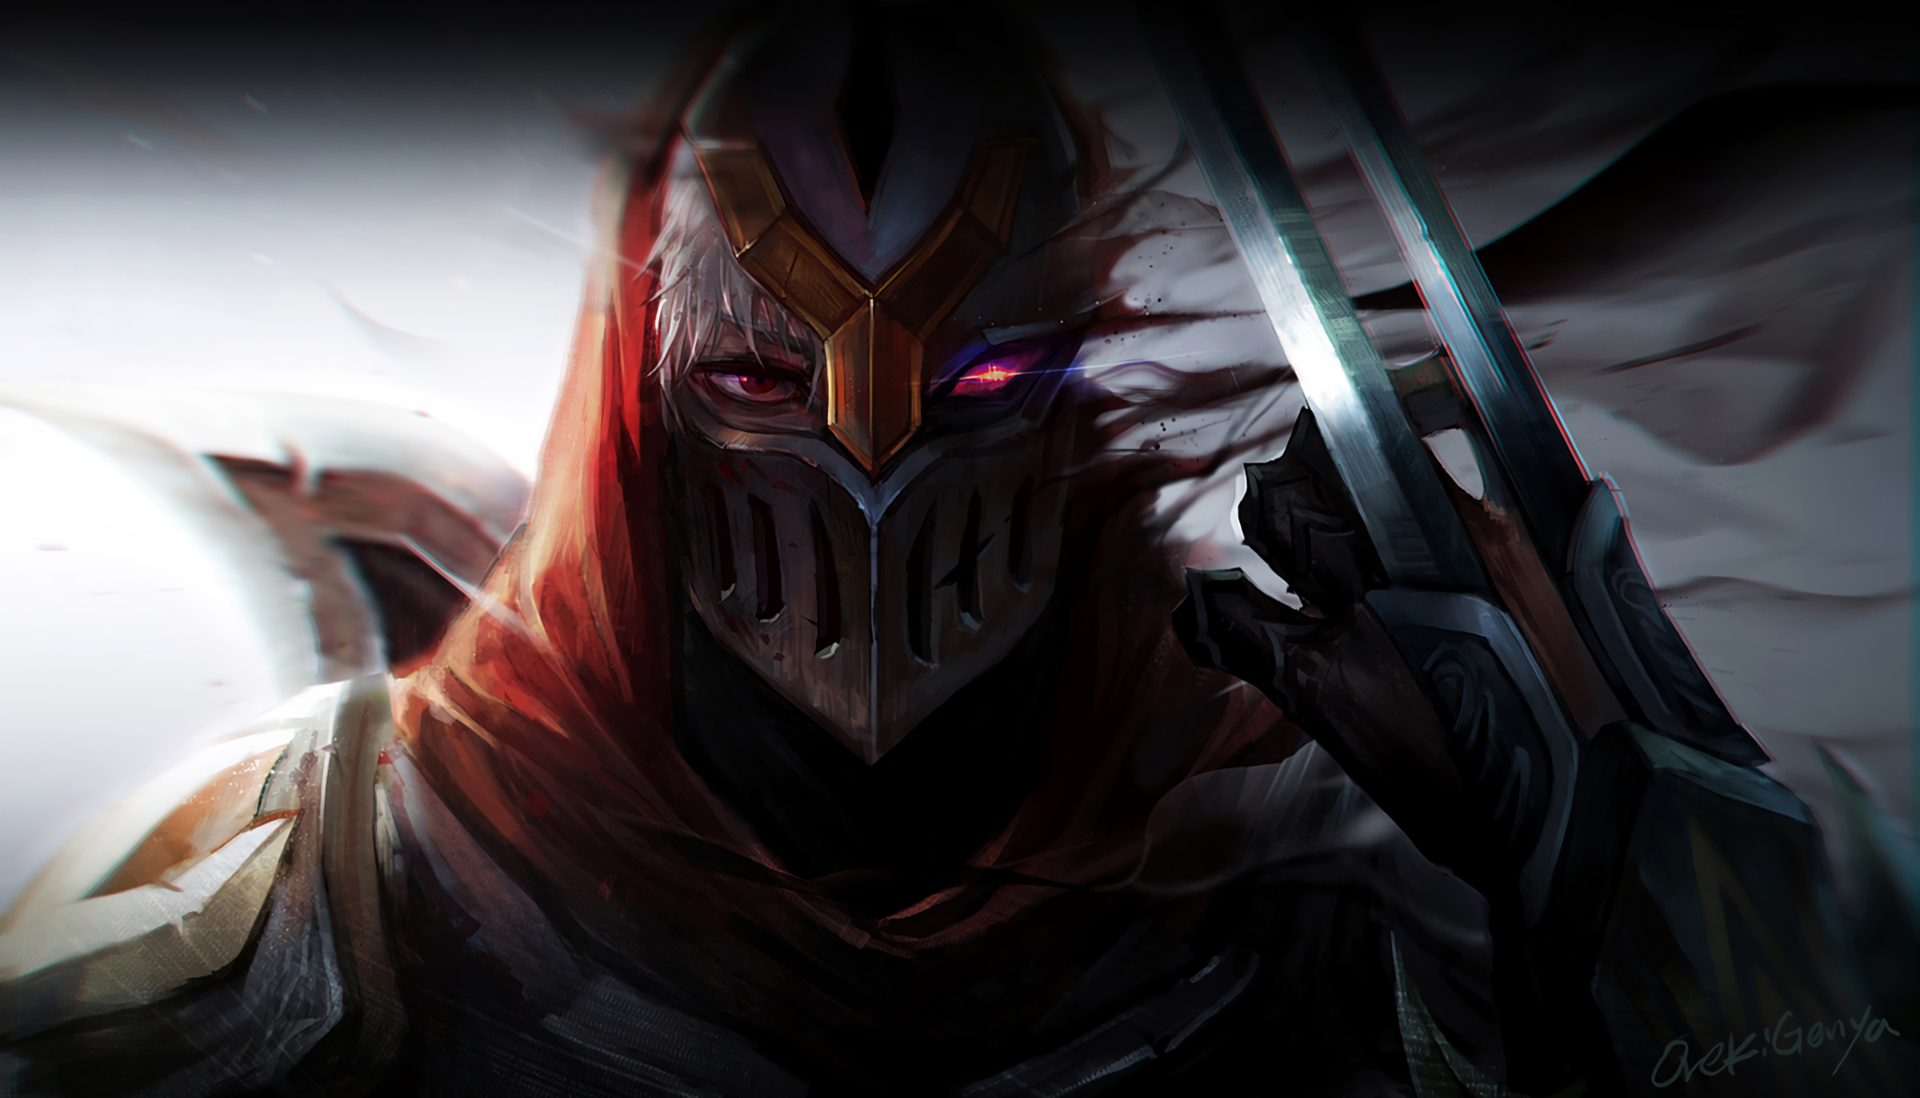 General 1920x1098 Zed (League of Legends) PC gaming video game art digital art video games watermarked